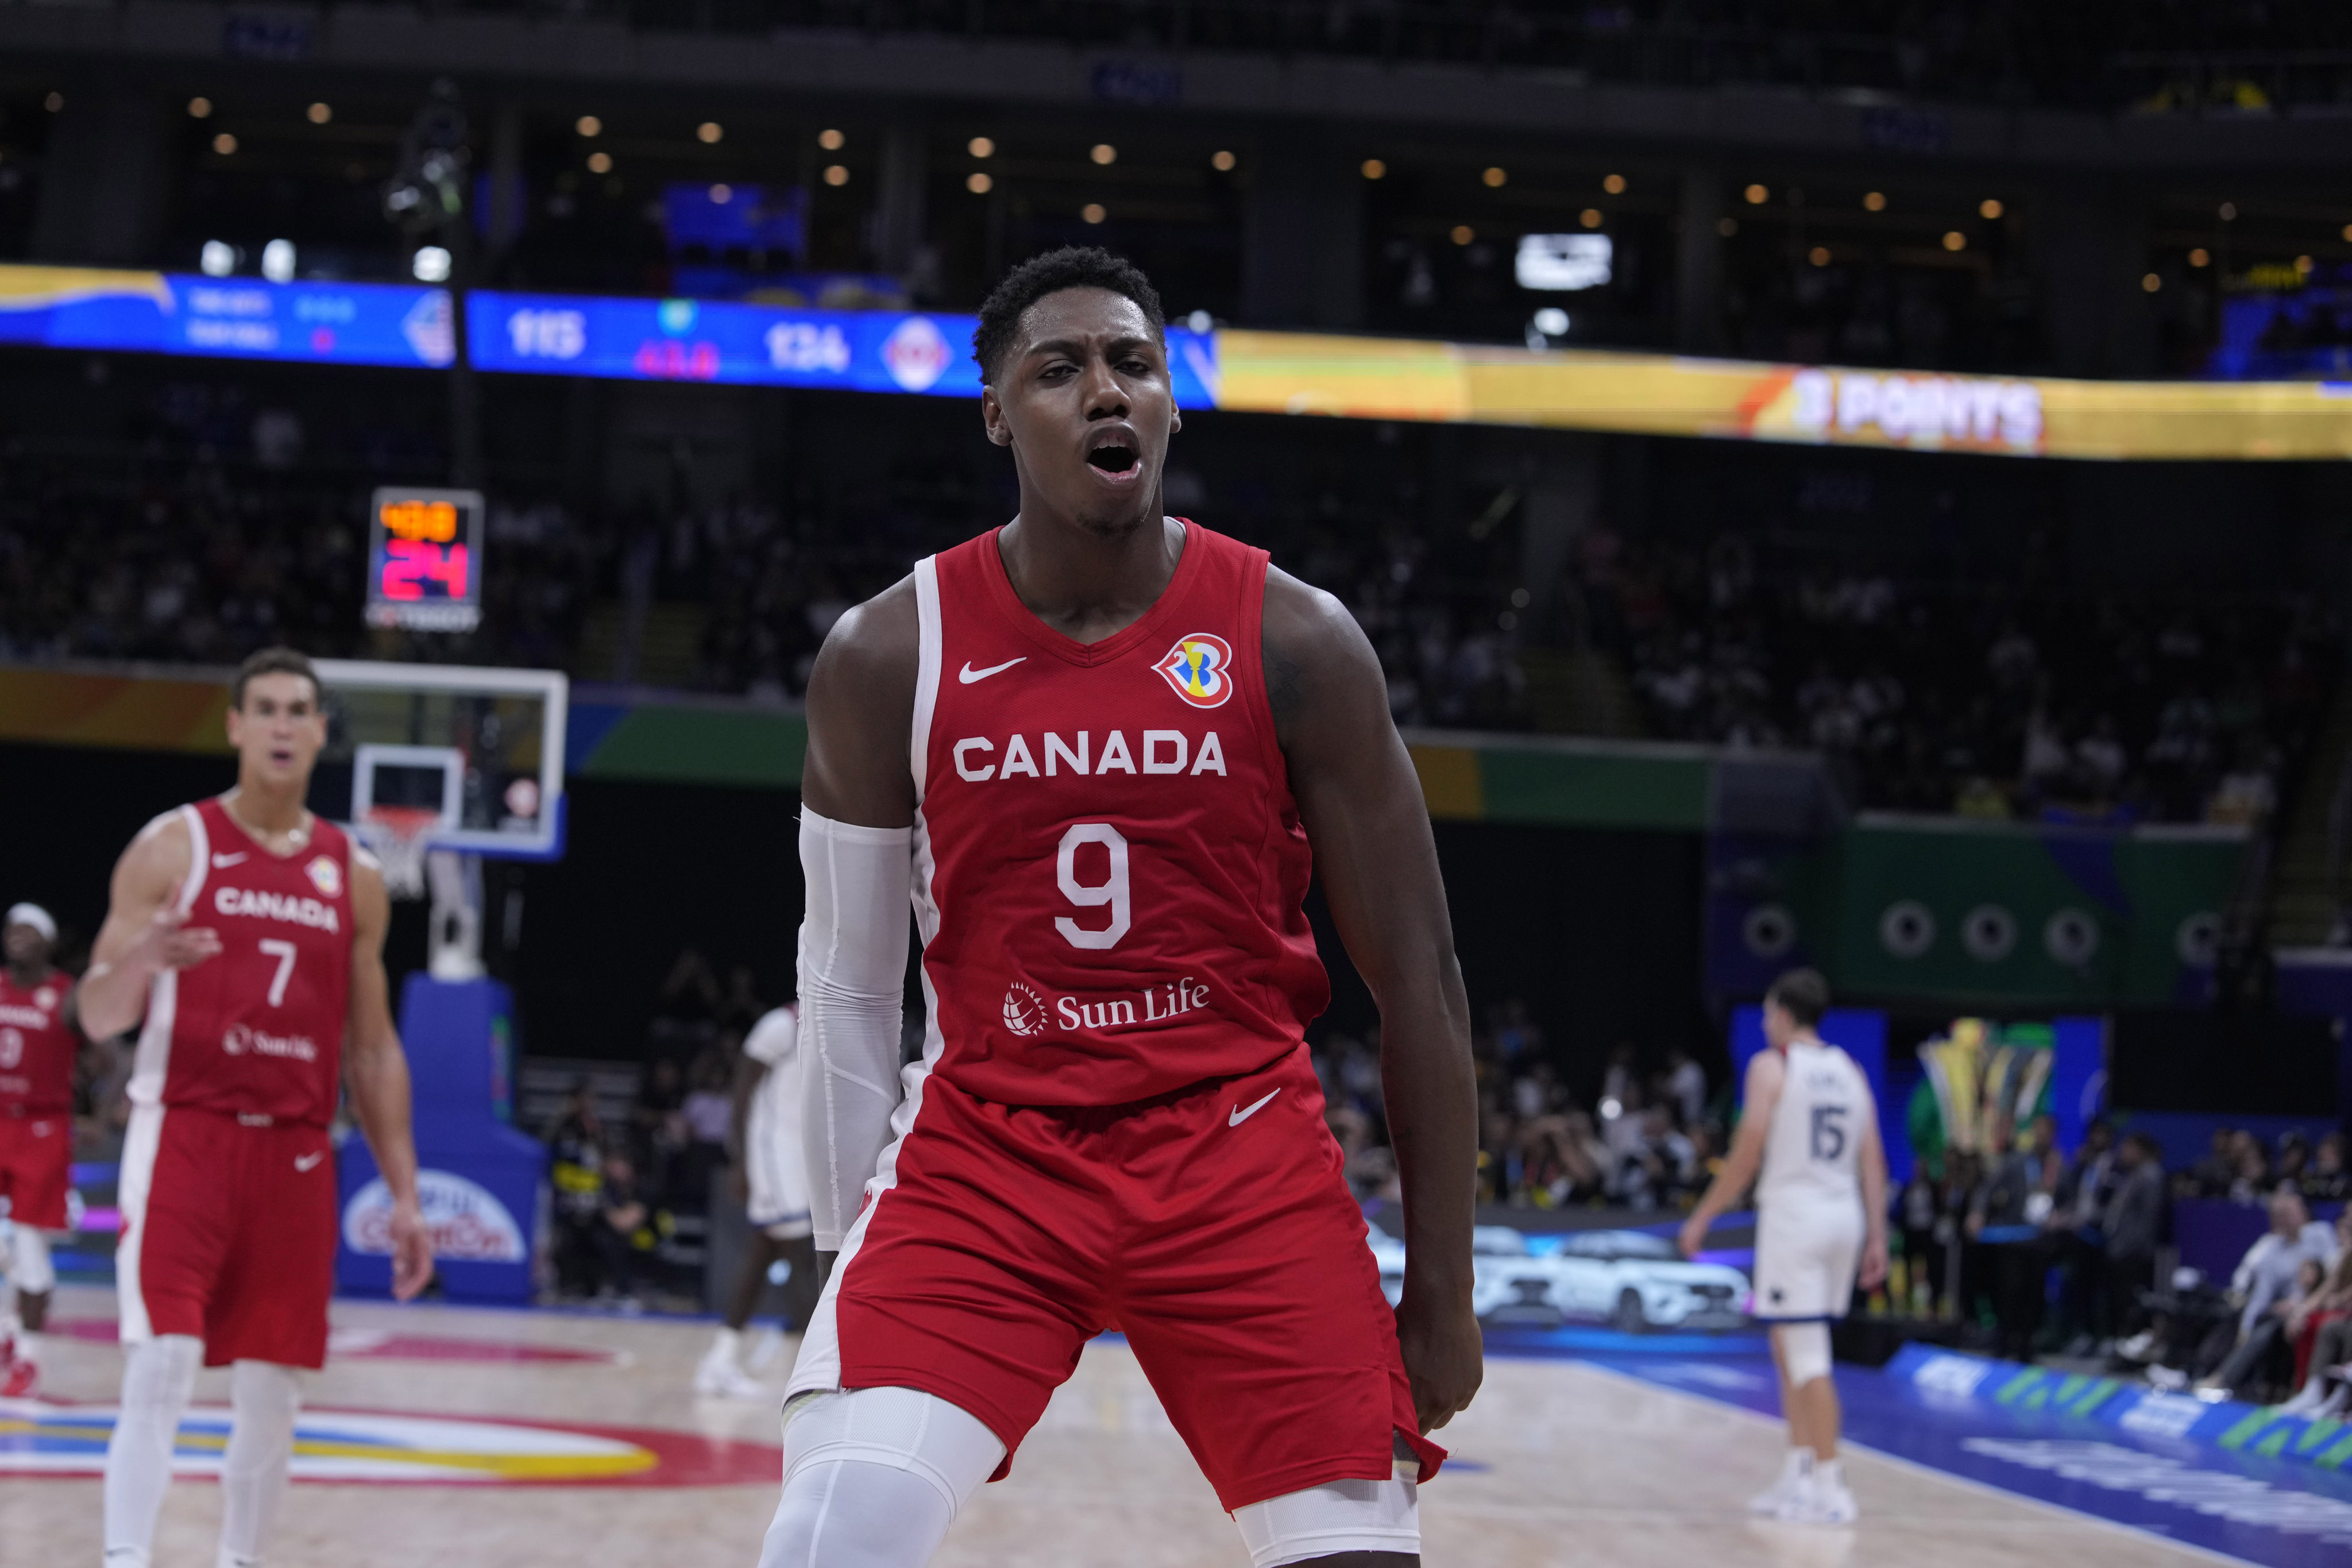 Canada medal for the first time with a third-place finish at the Fiba Basketball World Cup. Photo: AP